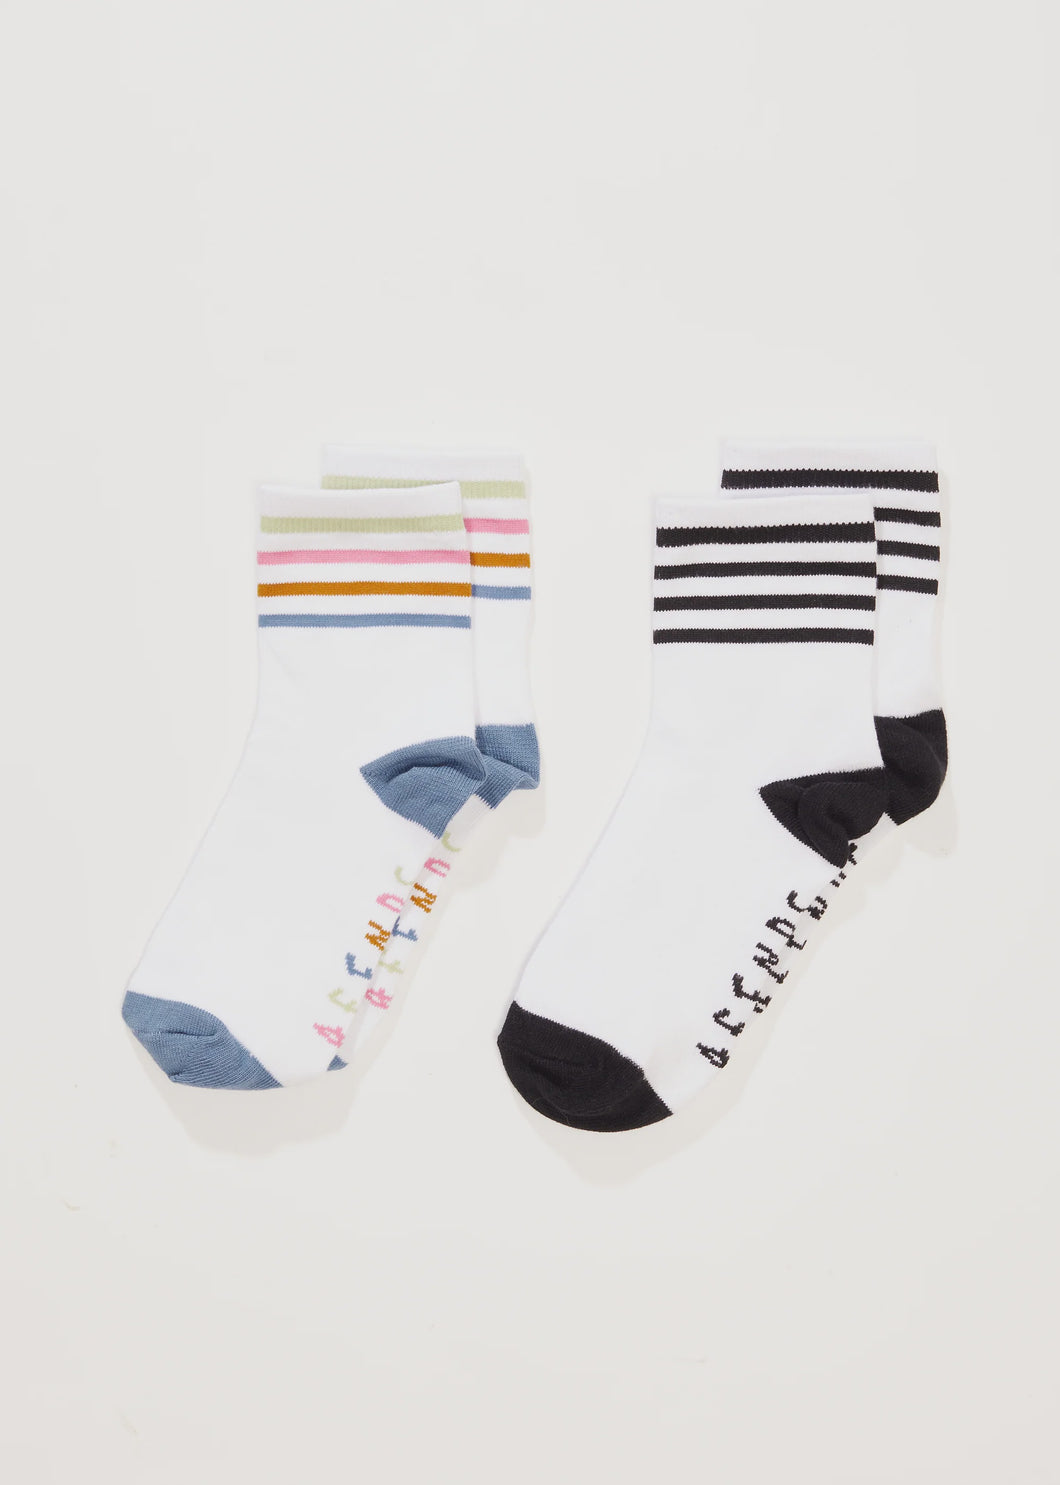 Afends Funhouse Recycled Socks Two Pack - Multi